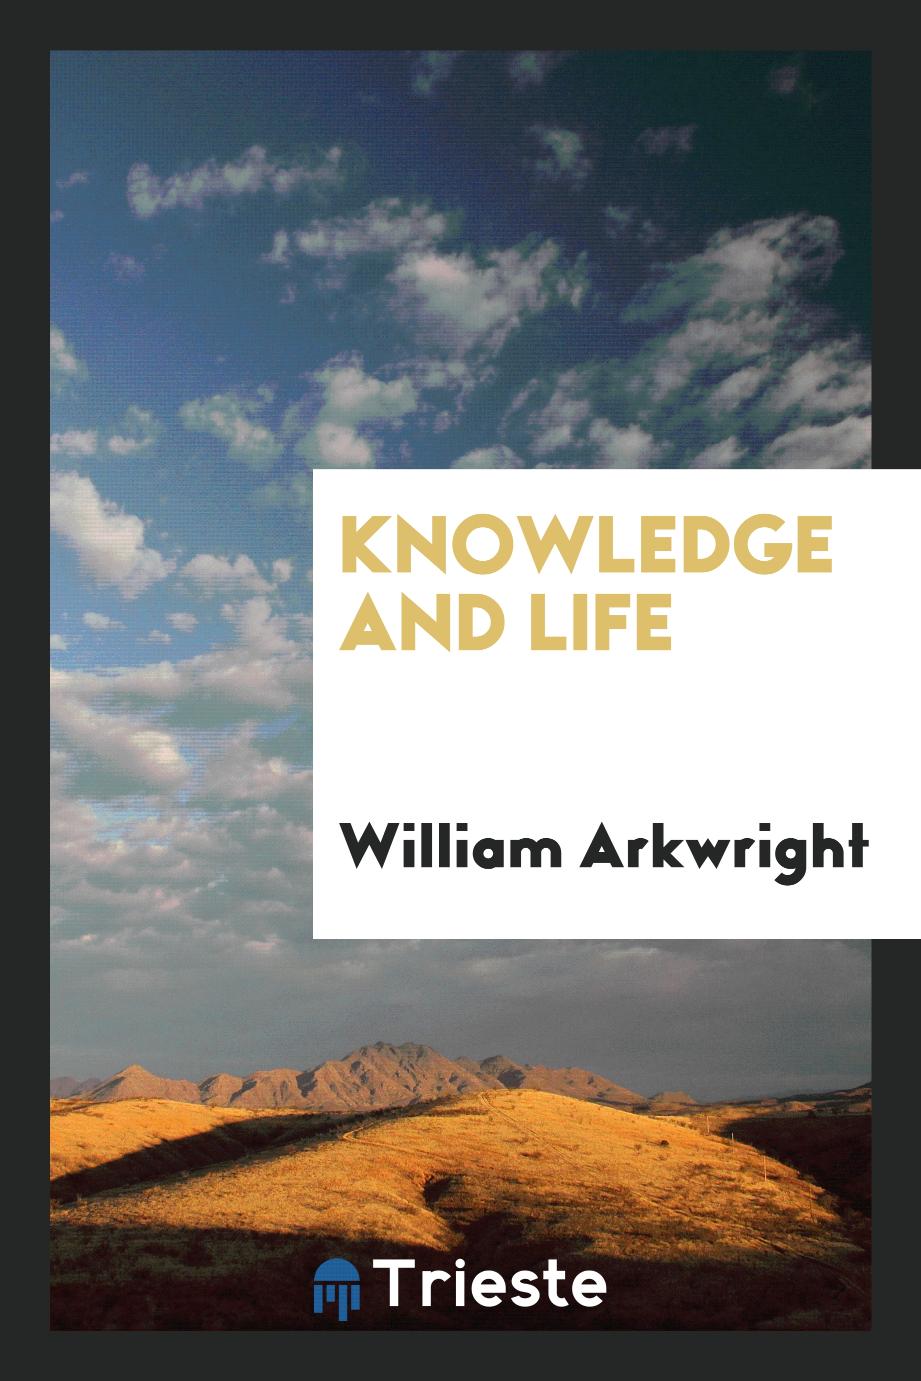 Knowledge and life